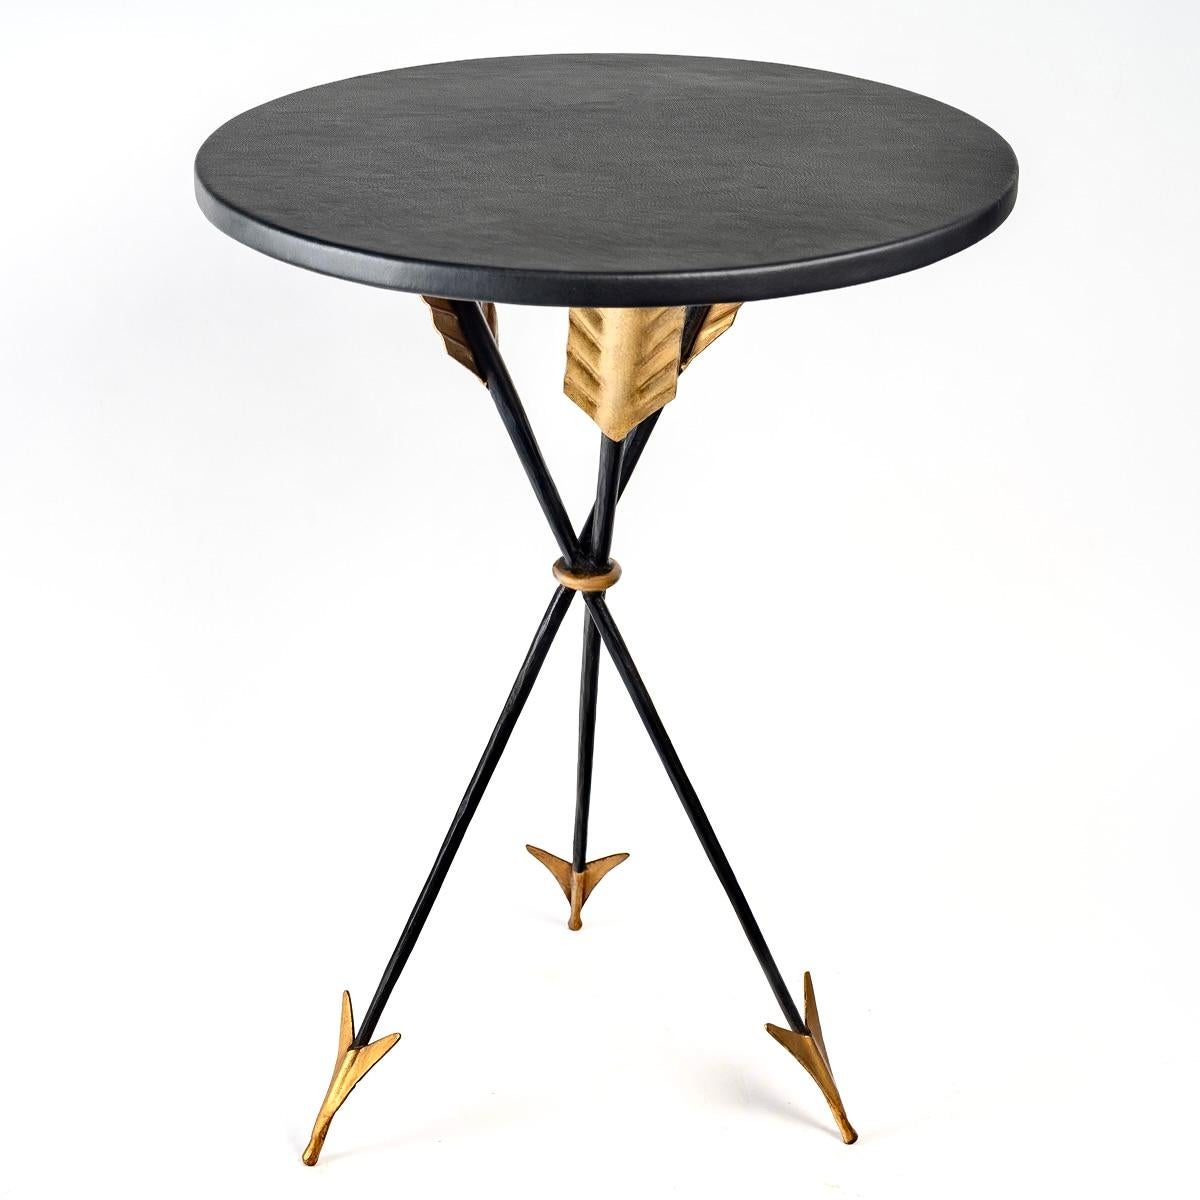 Pair of elegant pedestal tables of neo-classical style.

Composed of 3 legs crossing in the center forming a tripod in black wrought iron maintained by a golden ring and decorated at the top and at the base of the 3 legs with golden arrows in